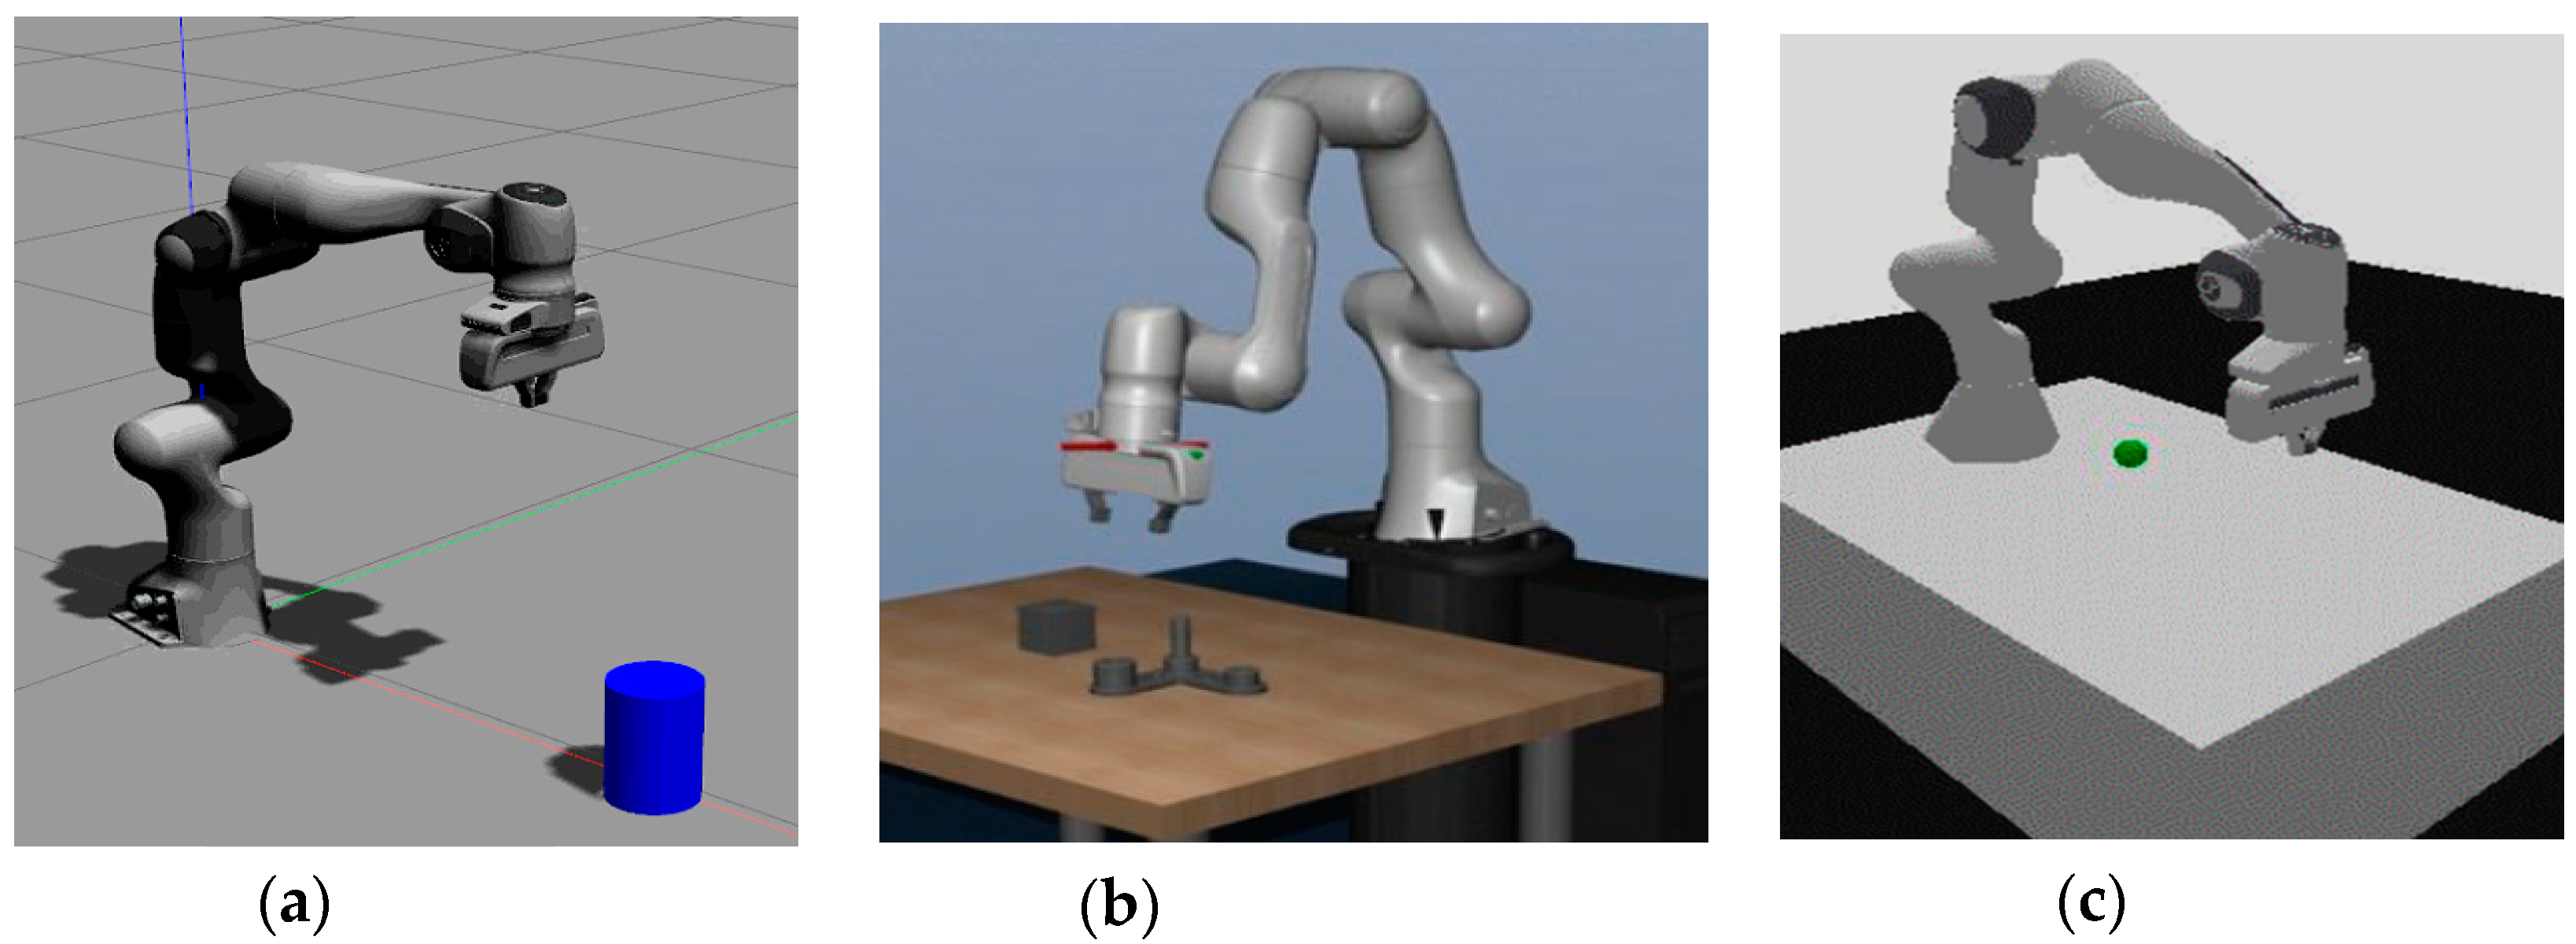 Robotics | Free Full-Text | Simulated and Real Robotic Reach, Grasp, and  Pick-and-Place Using Combined Reinforcement Learning and Traditional  Controls